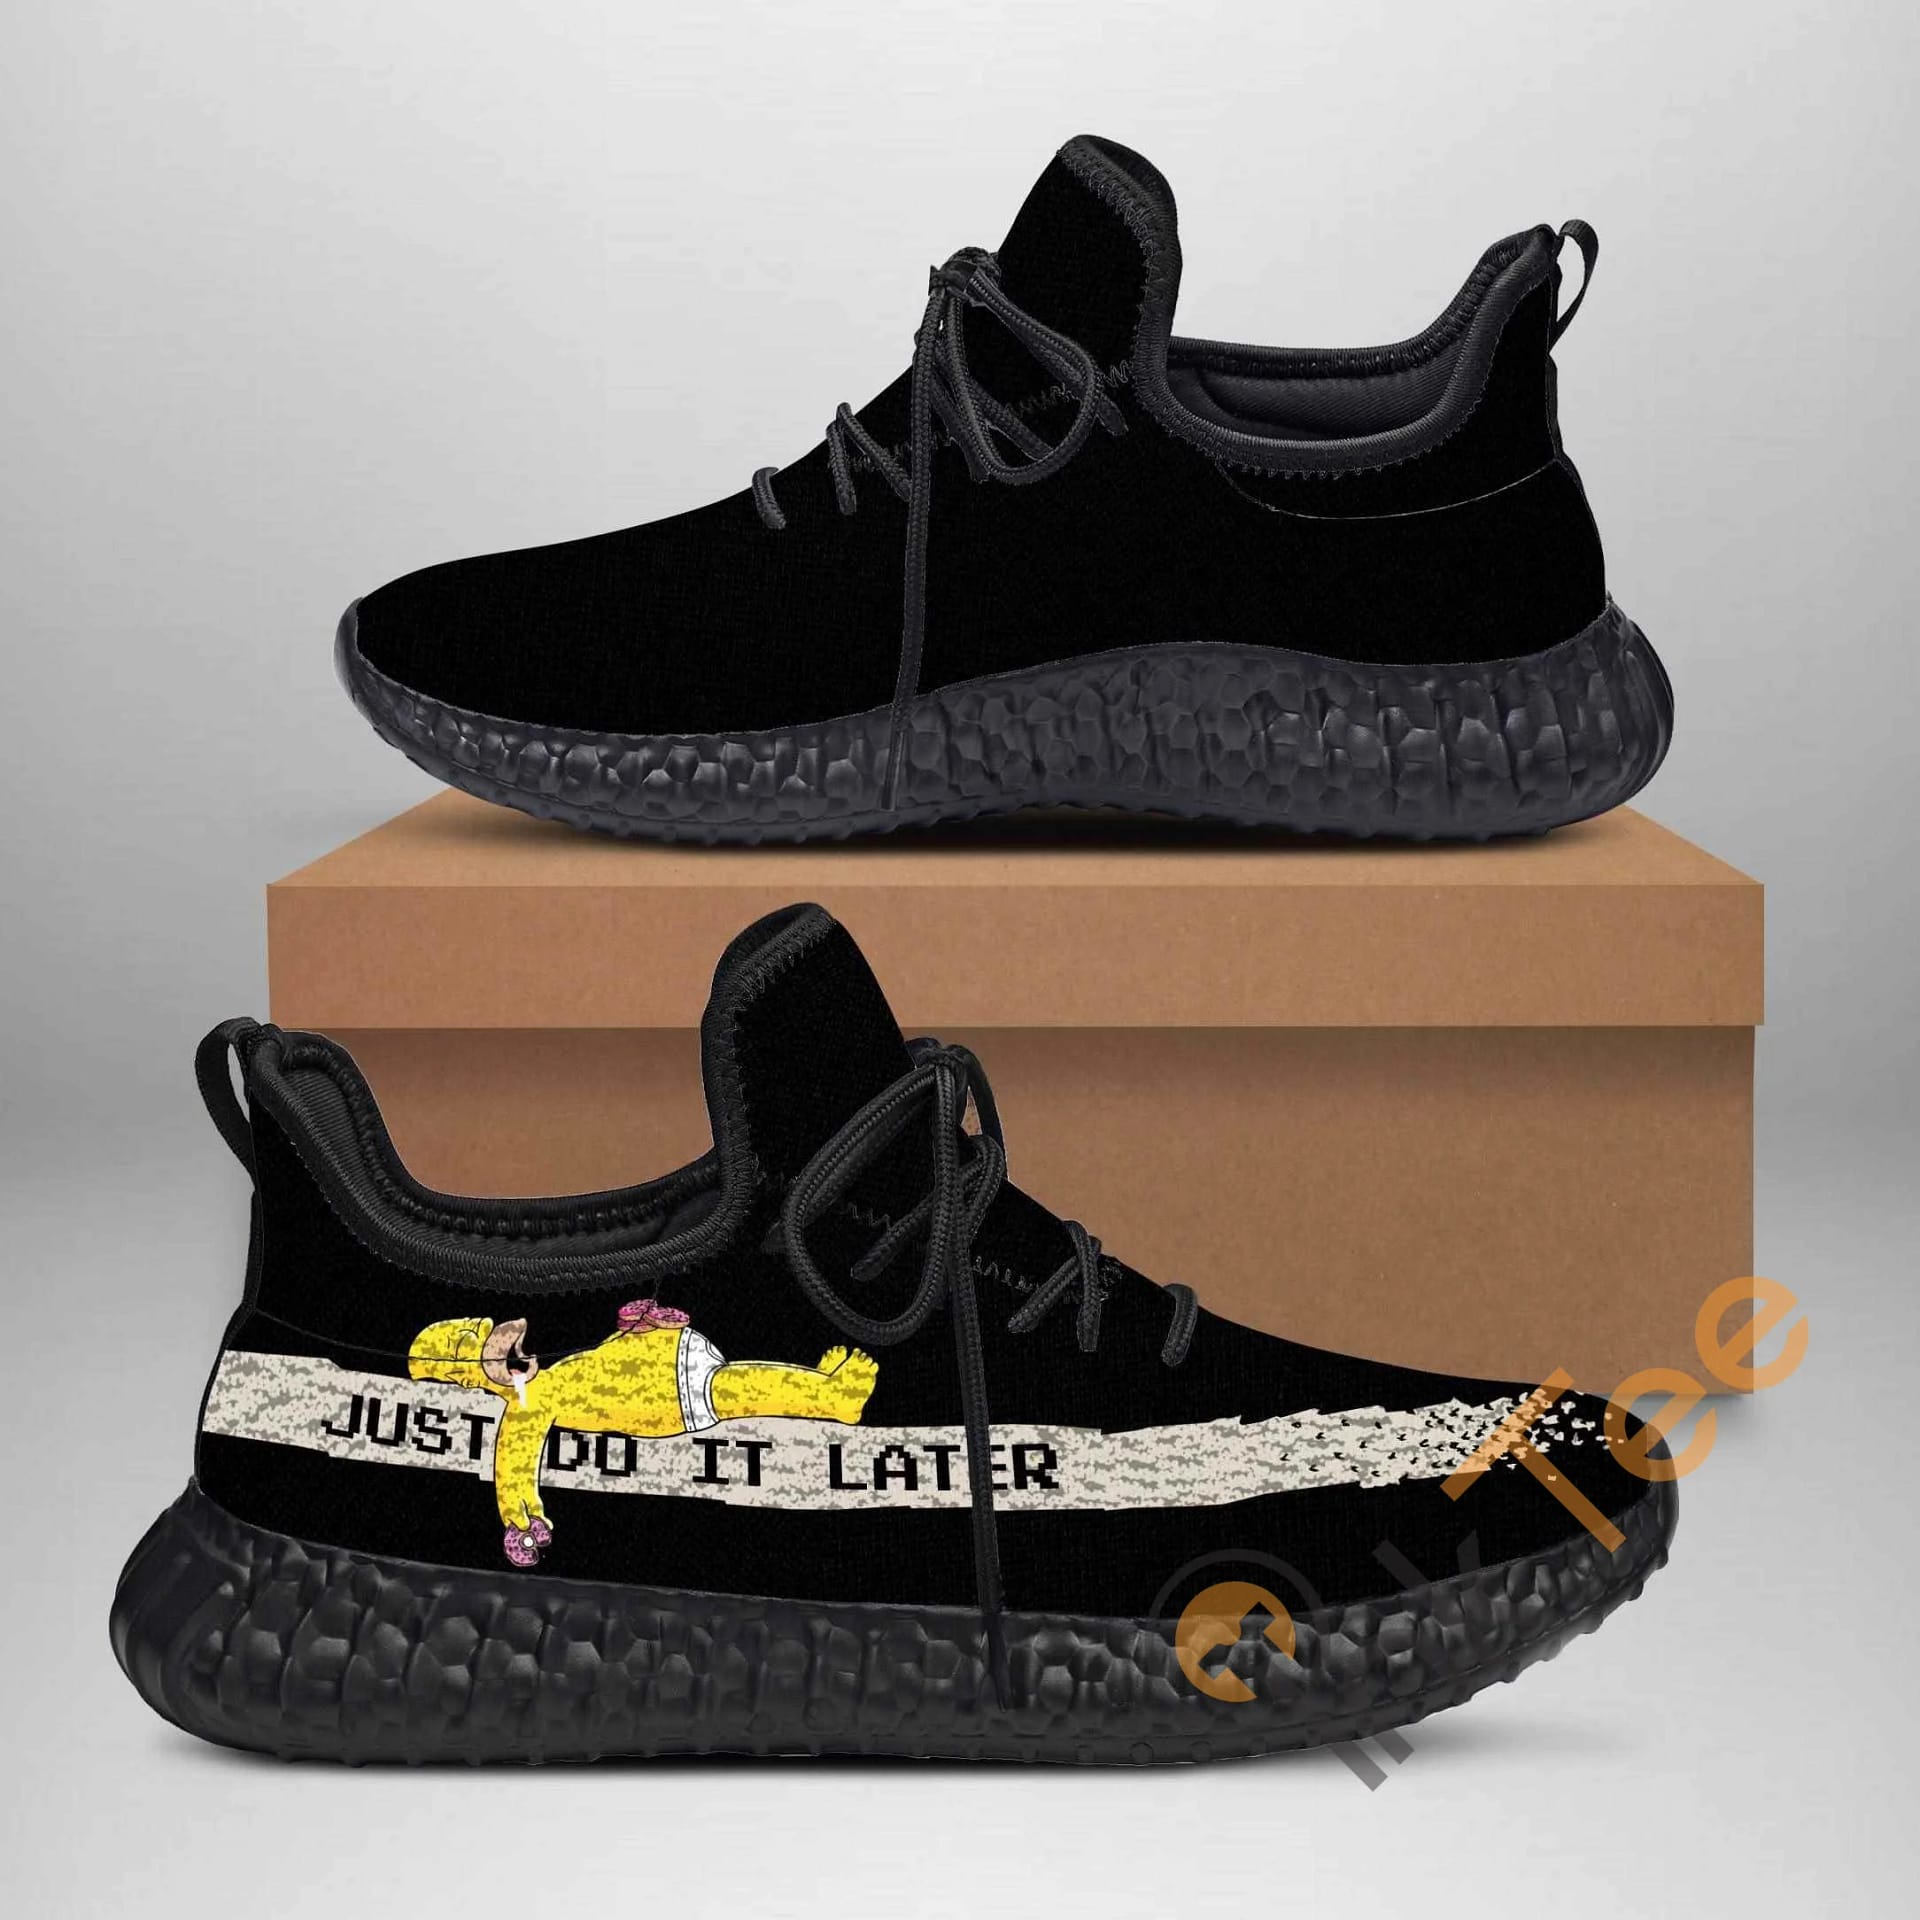 Tired Homer Simpson Just Do It Later Amazon Best Selling Yeezy Boost